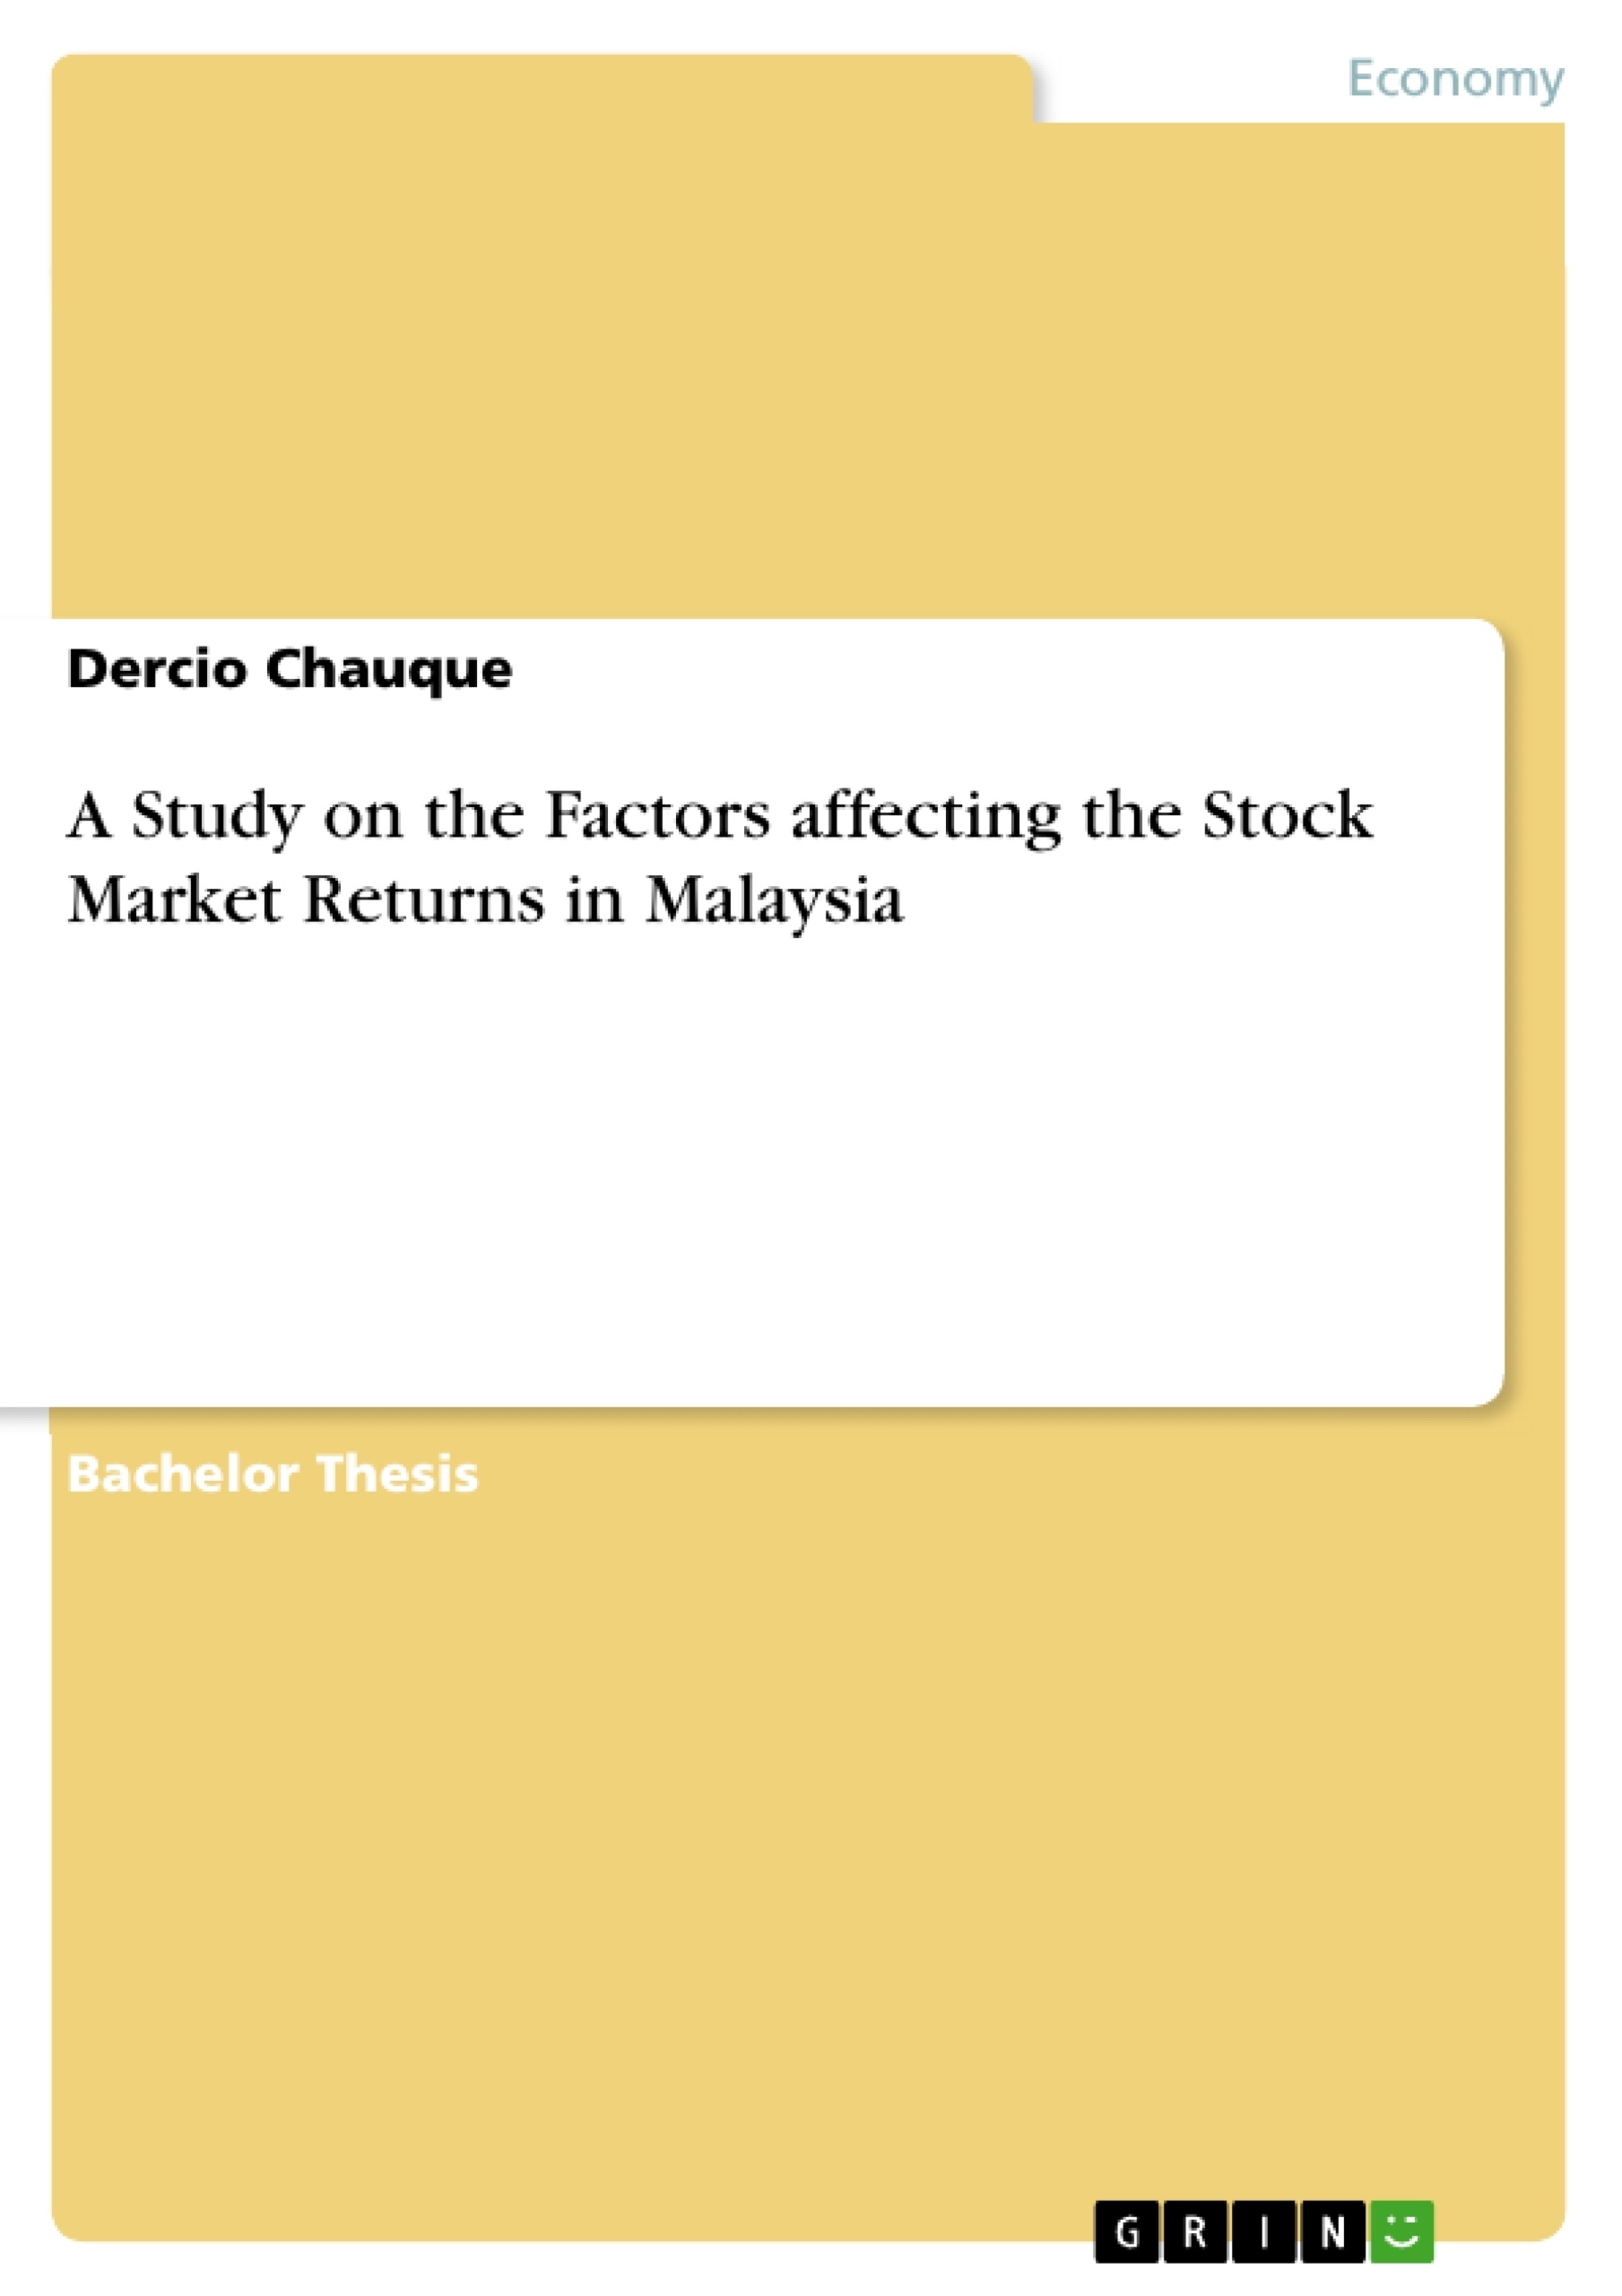 Title: A Study on the Factors affecting the Stock Market Returns in Malaysia